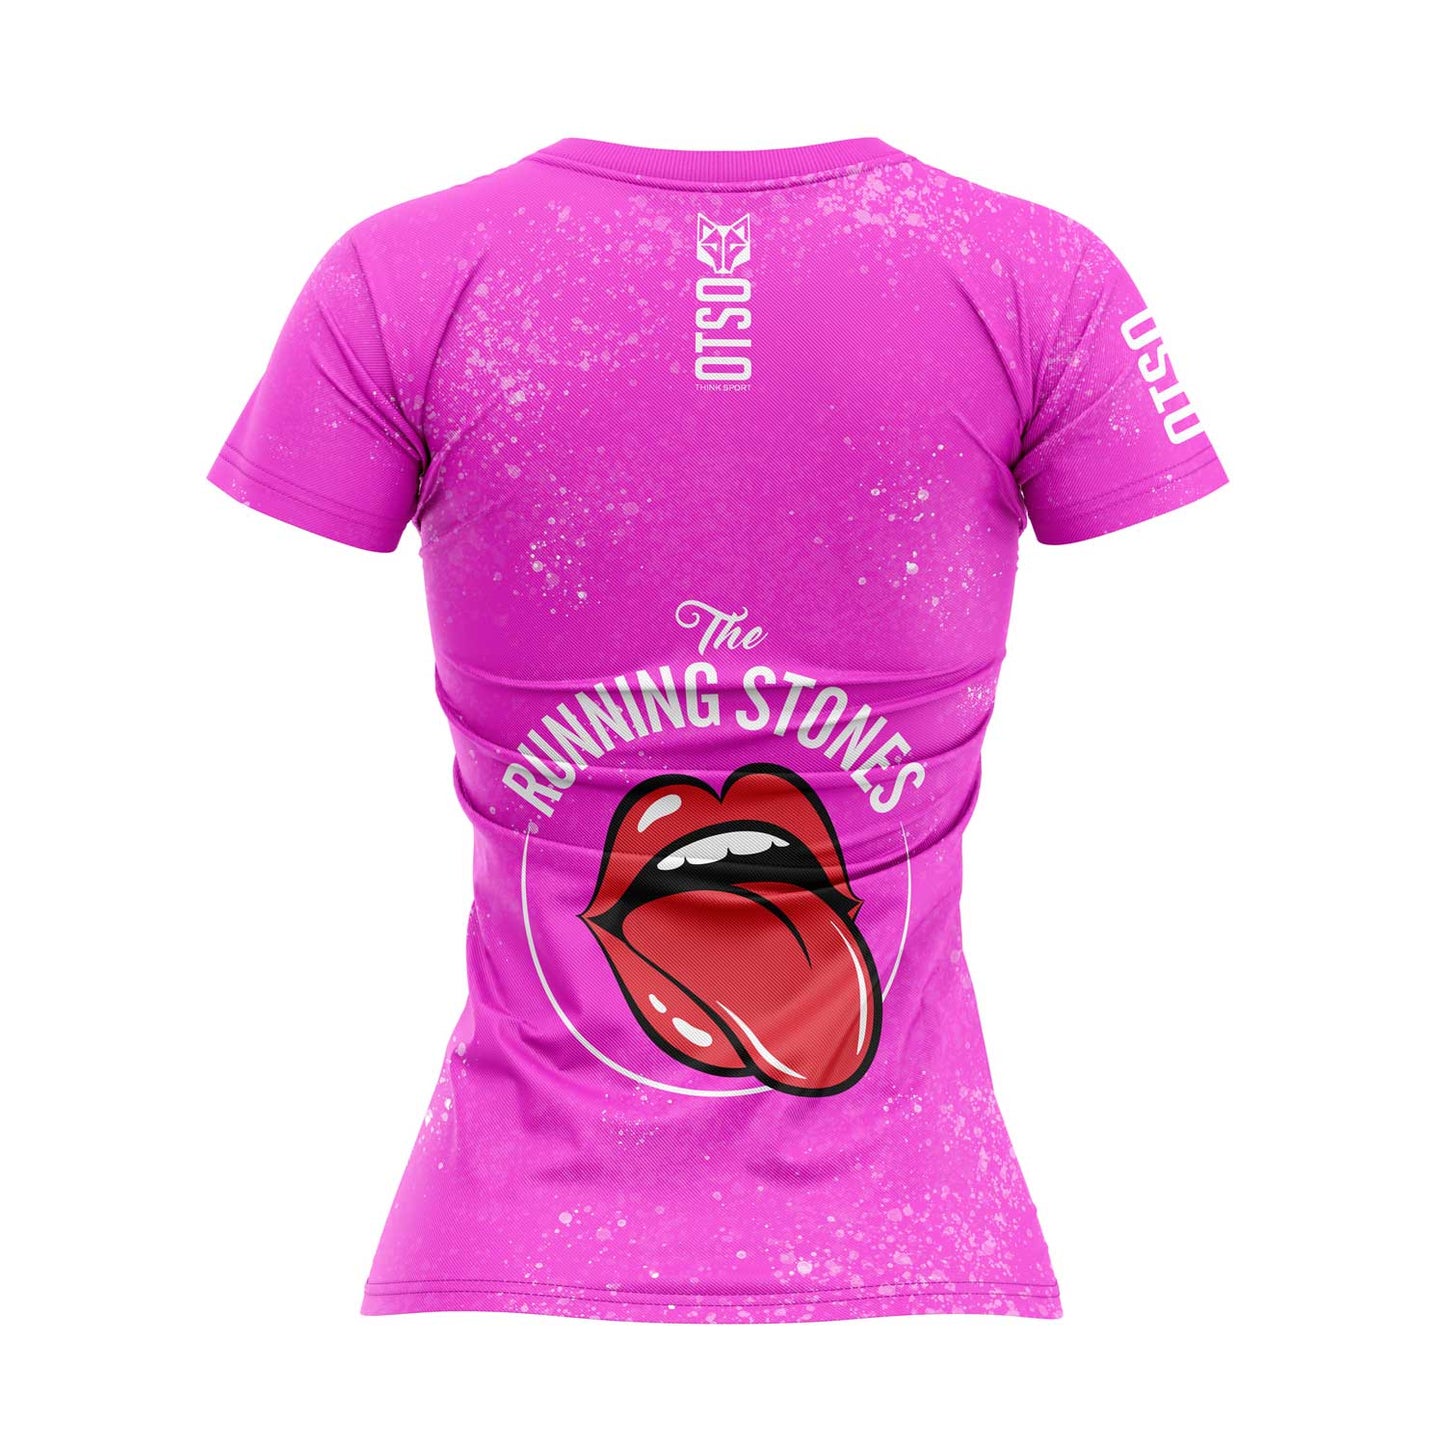 T-shirt manches courtes femme - Running Stones Pink